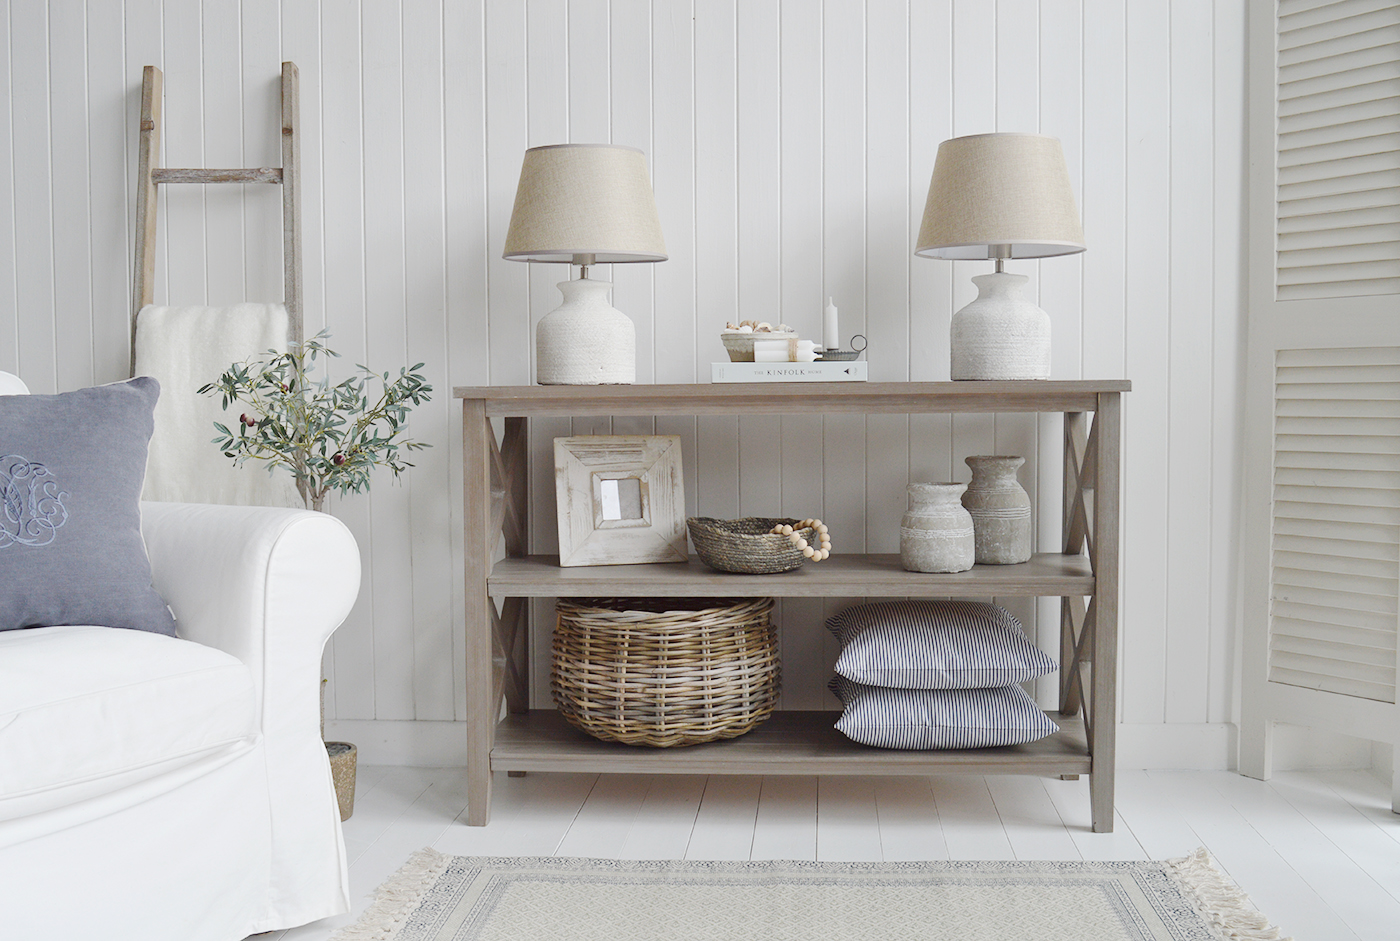 Cambridge Console Table - New England Interiors Furniture for Coastal, Modern Farmhouse and Country Homes